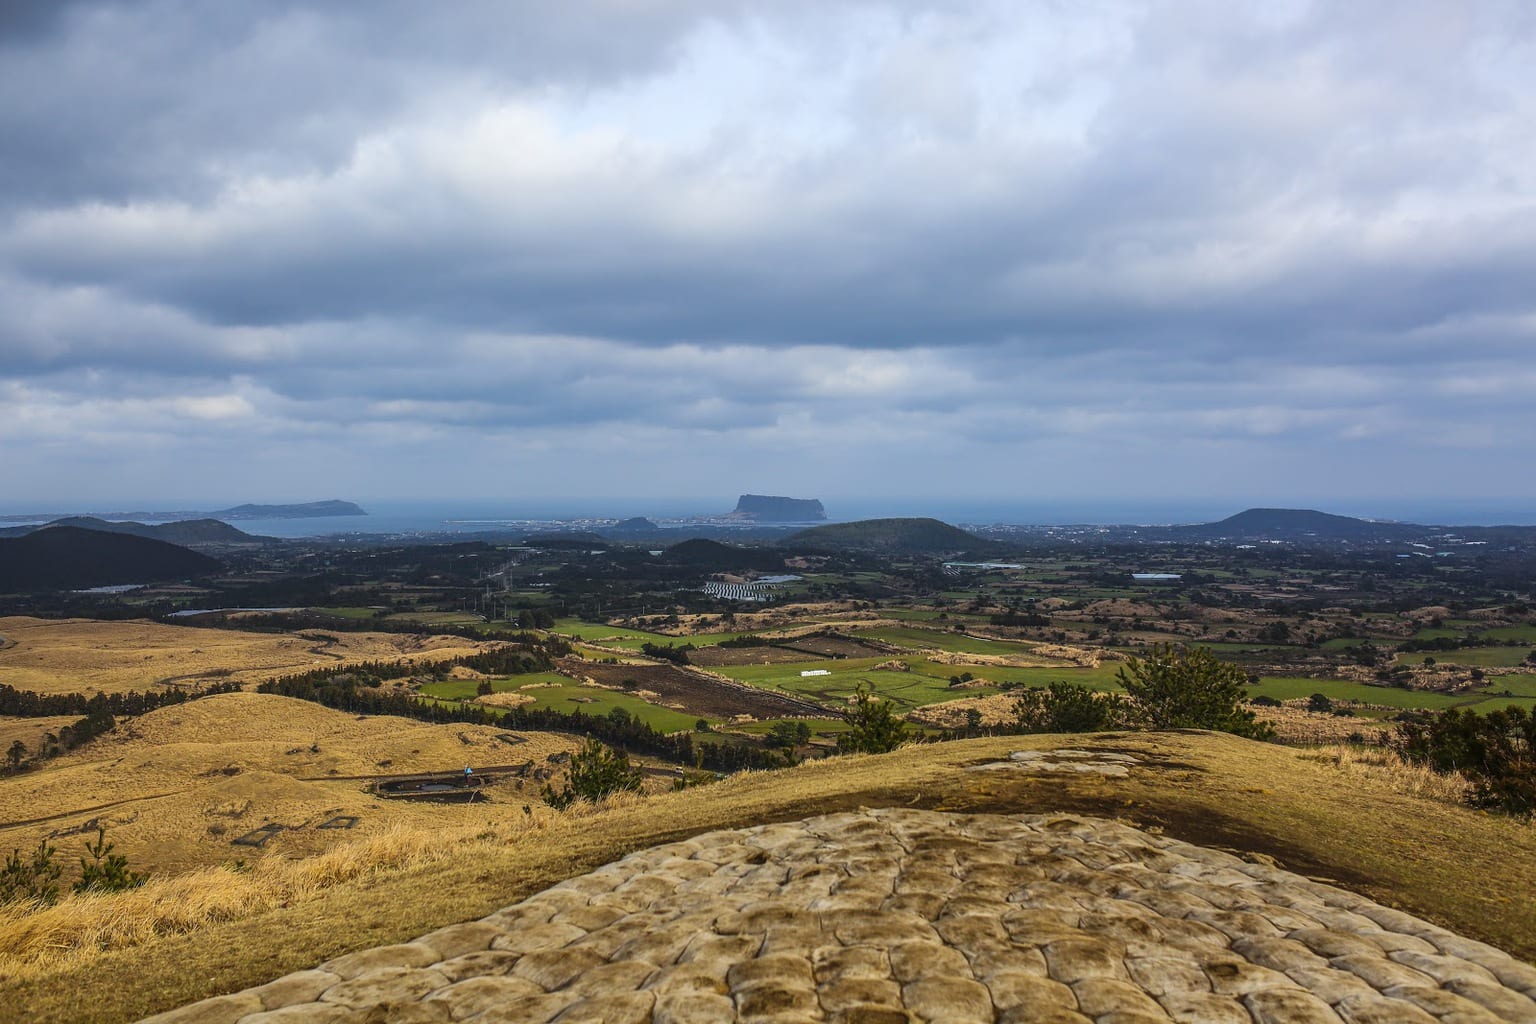 Hiking one of the volcanic cones in Jeju